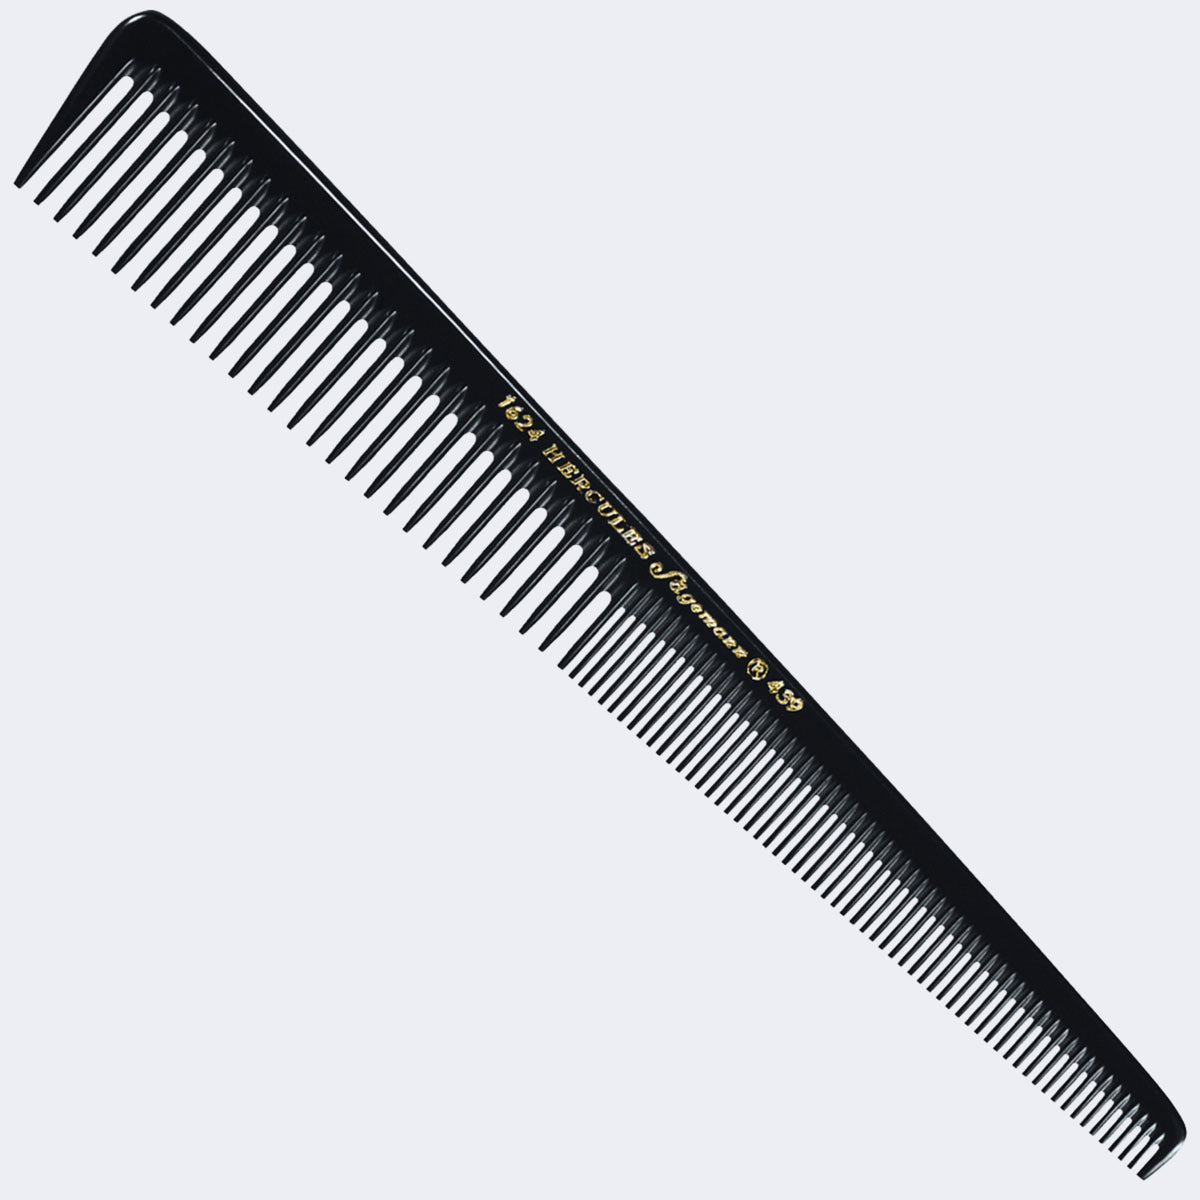 7.5" STYLING COMB FOR BARBERS